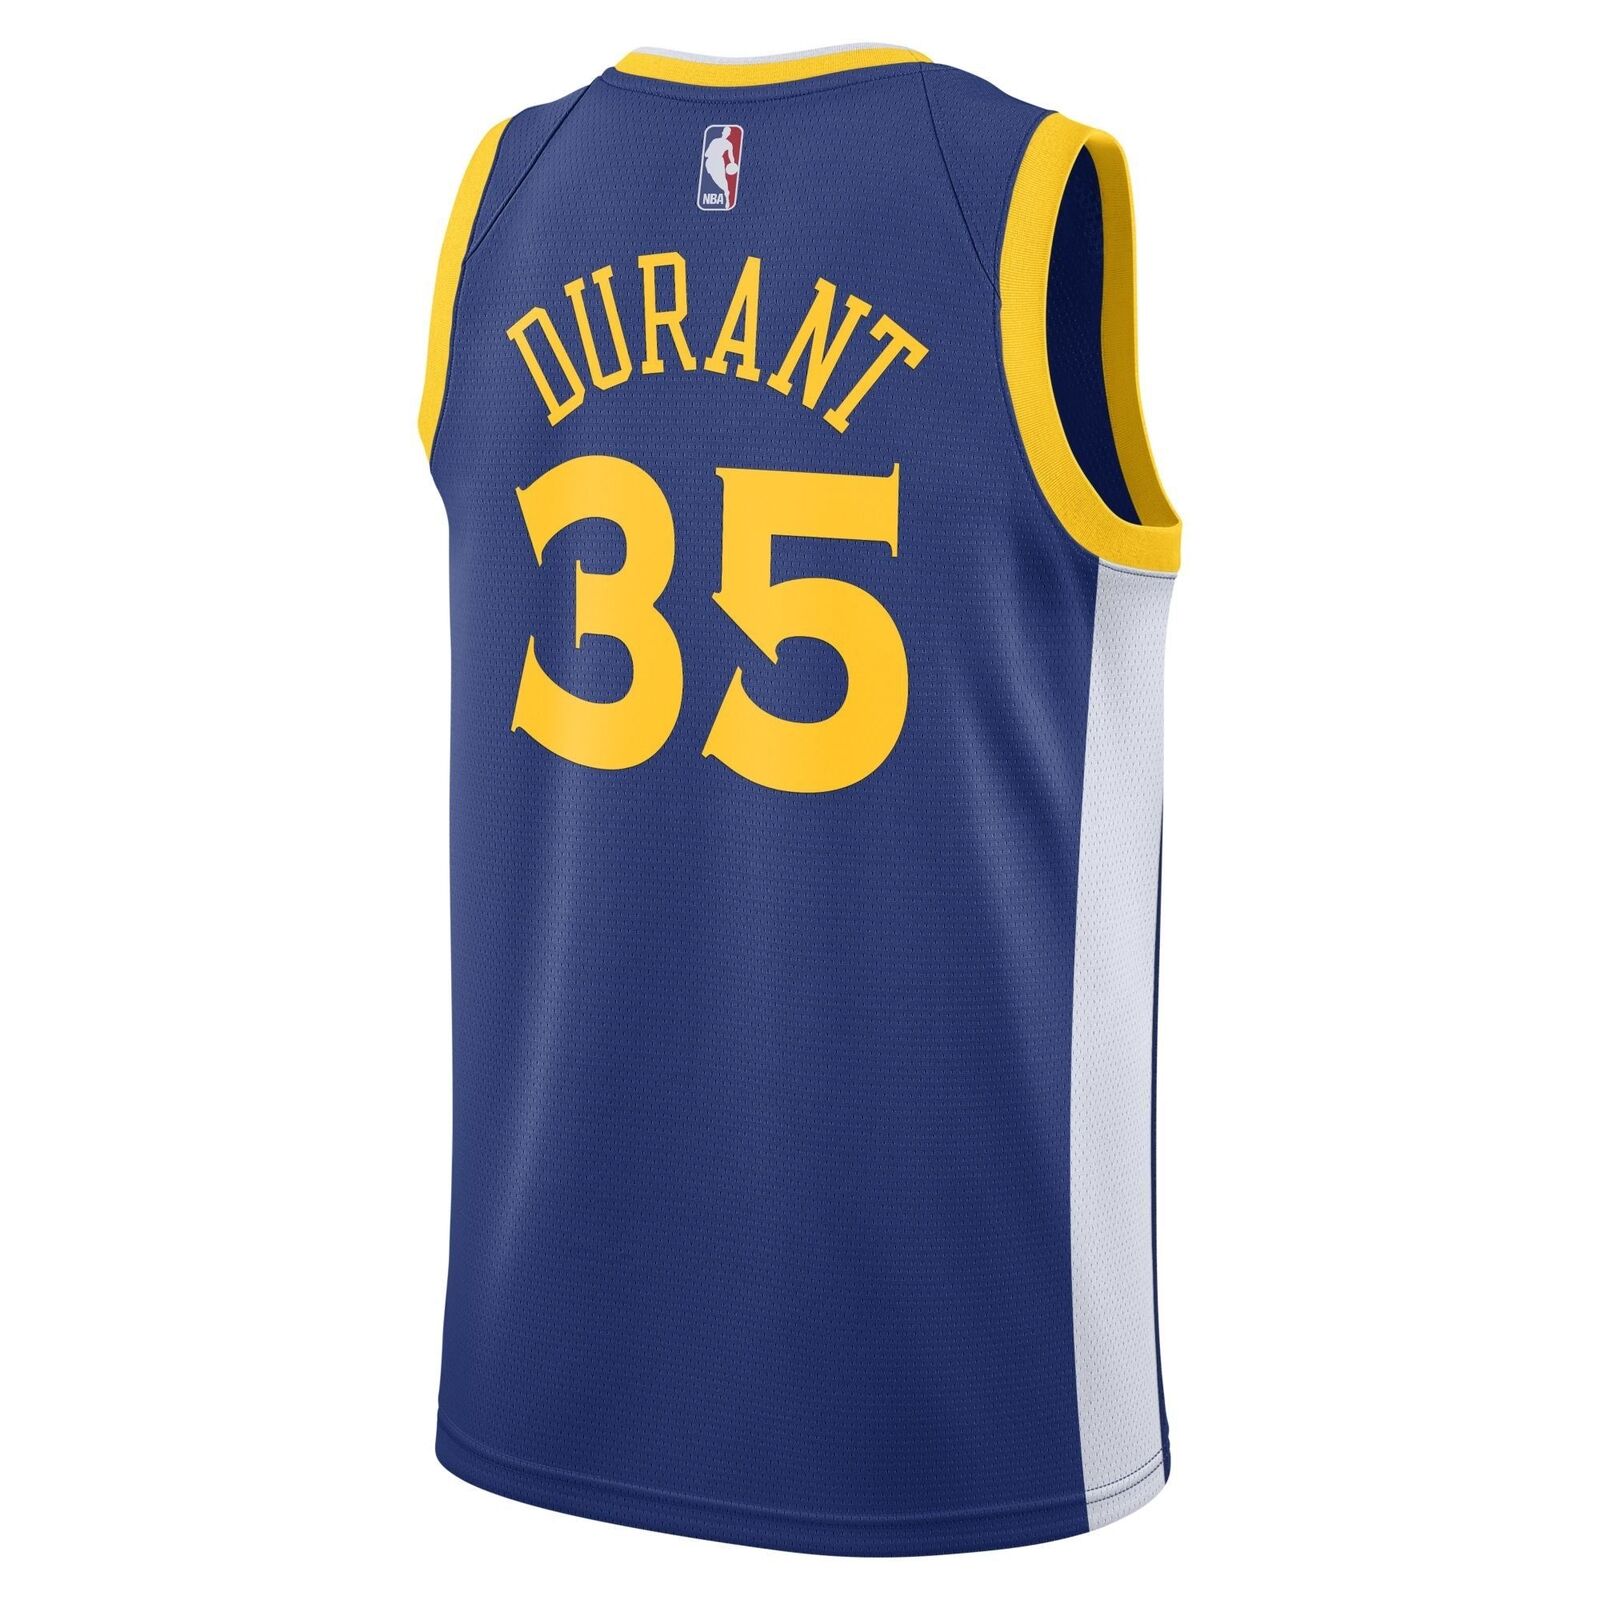 NBA GOLDEN STATE CHINESE NEW YEAR JERSEY #35 KEVIN DURANT SIZE “XL”